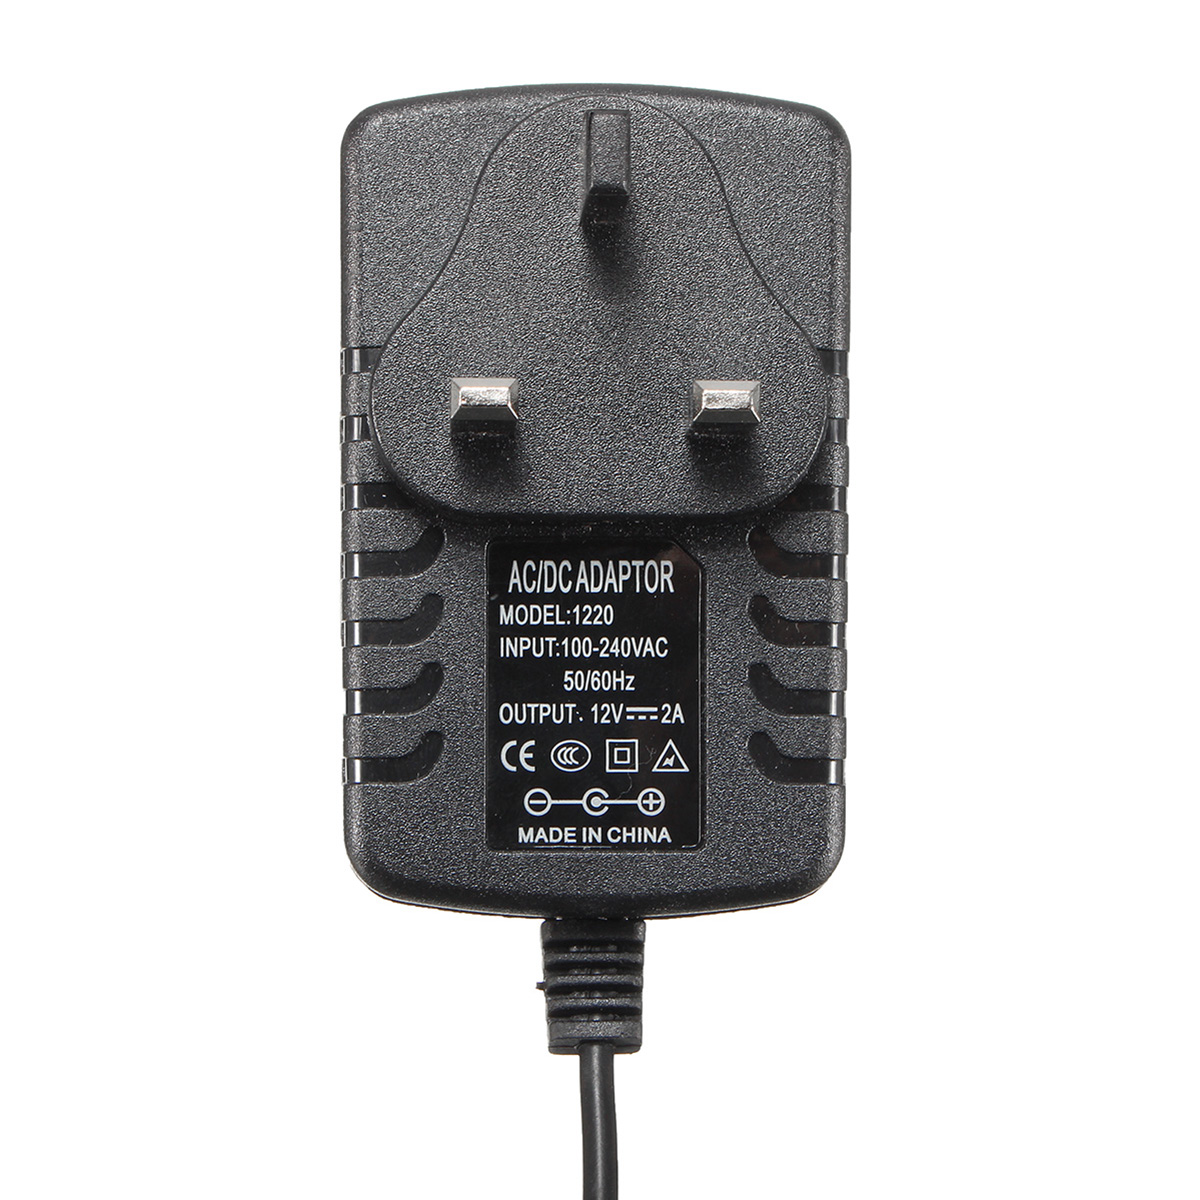 12v-2A-Mains-Power-Supply-Adapter-Charger-for-Bose-SoundLink-Mini-1377384-2